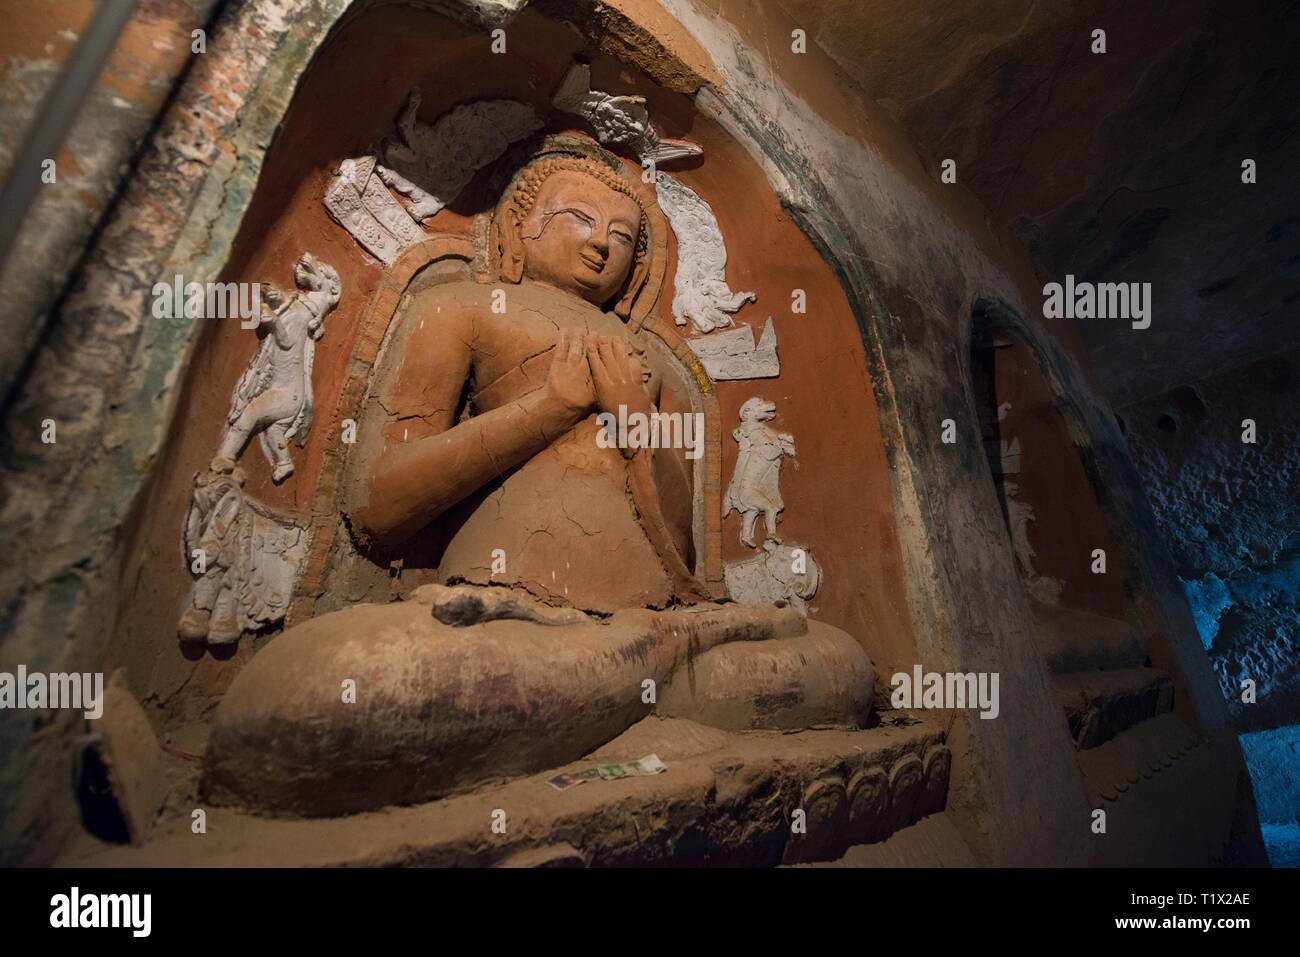 A Buddha statue in Mati Si temple, also called Horse's Hoof Temple in the rock caves, Sunan, Zhangye, Gansu, China Stock Photo